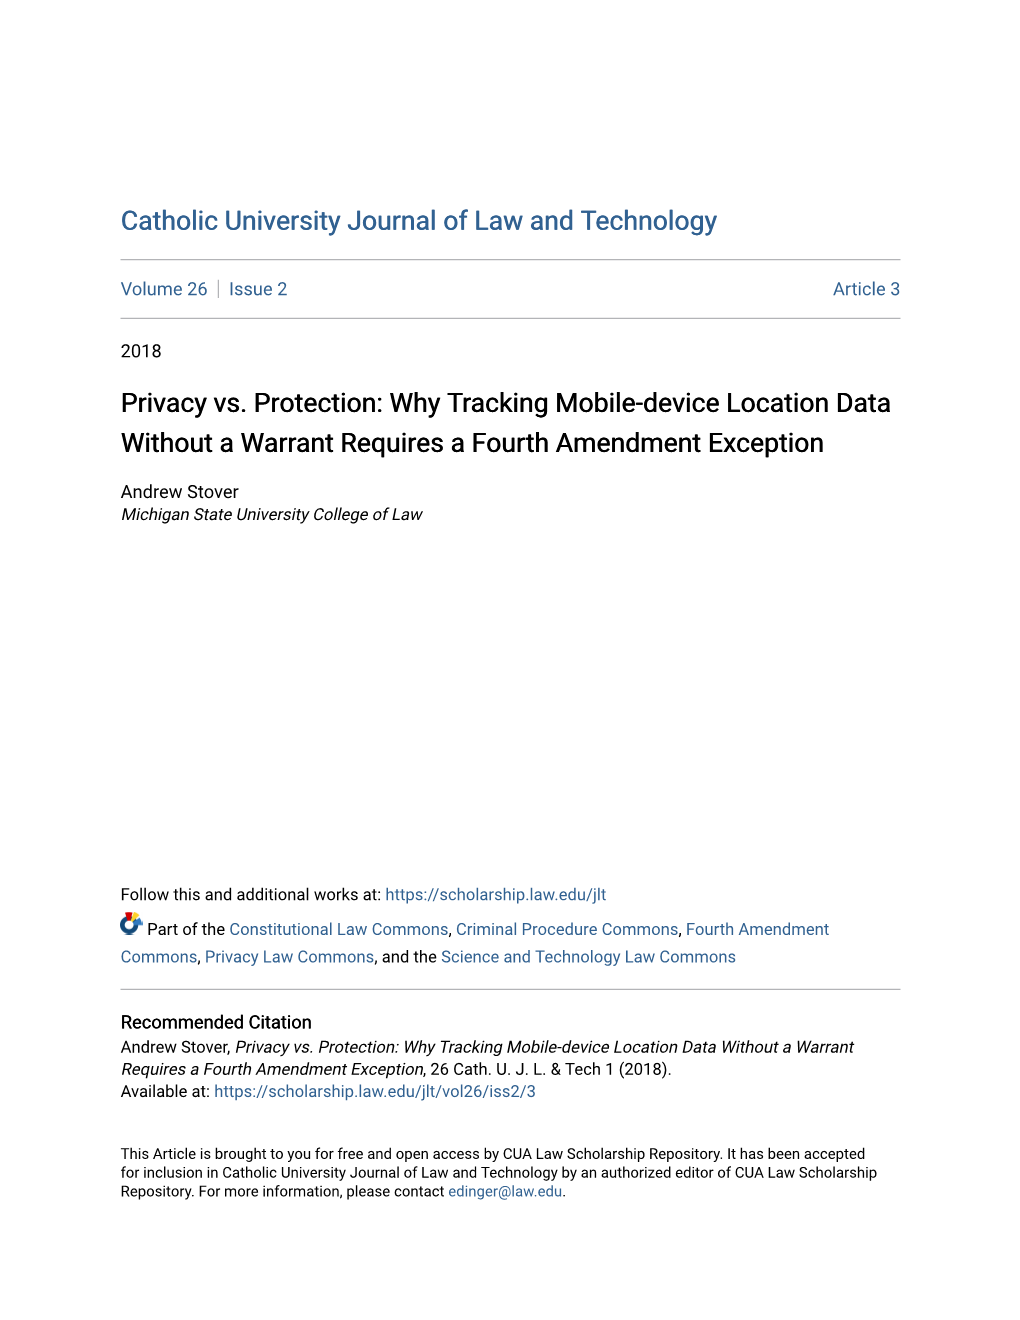 Why Tracking Mobile-Device Location Data Without a Warrant Requires a Fourth Amendment Exception